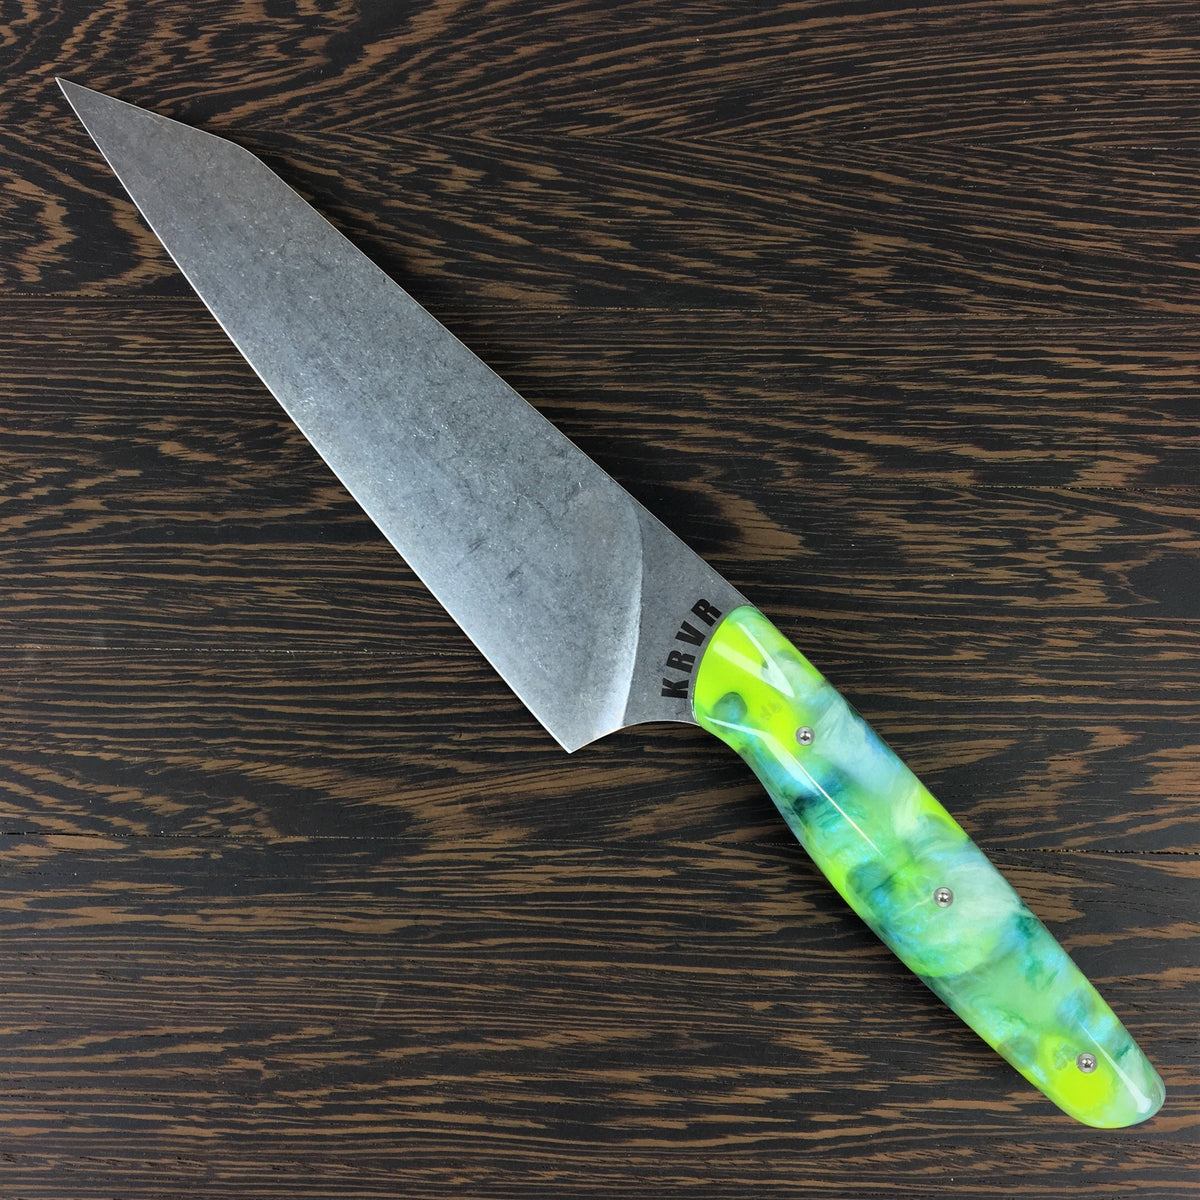 Head in the Clouds - 8” Gyuto Chef Knife S35VN Stainless Steel